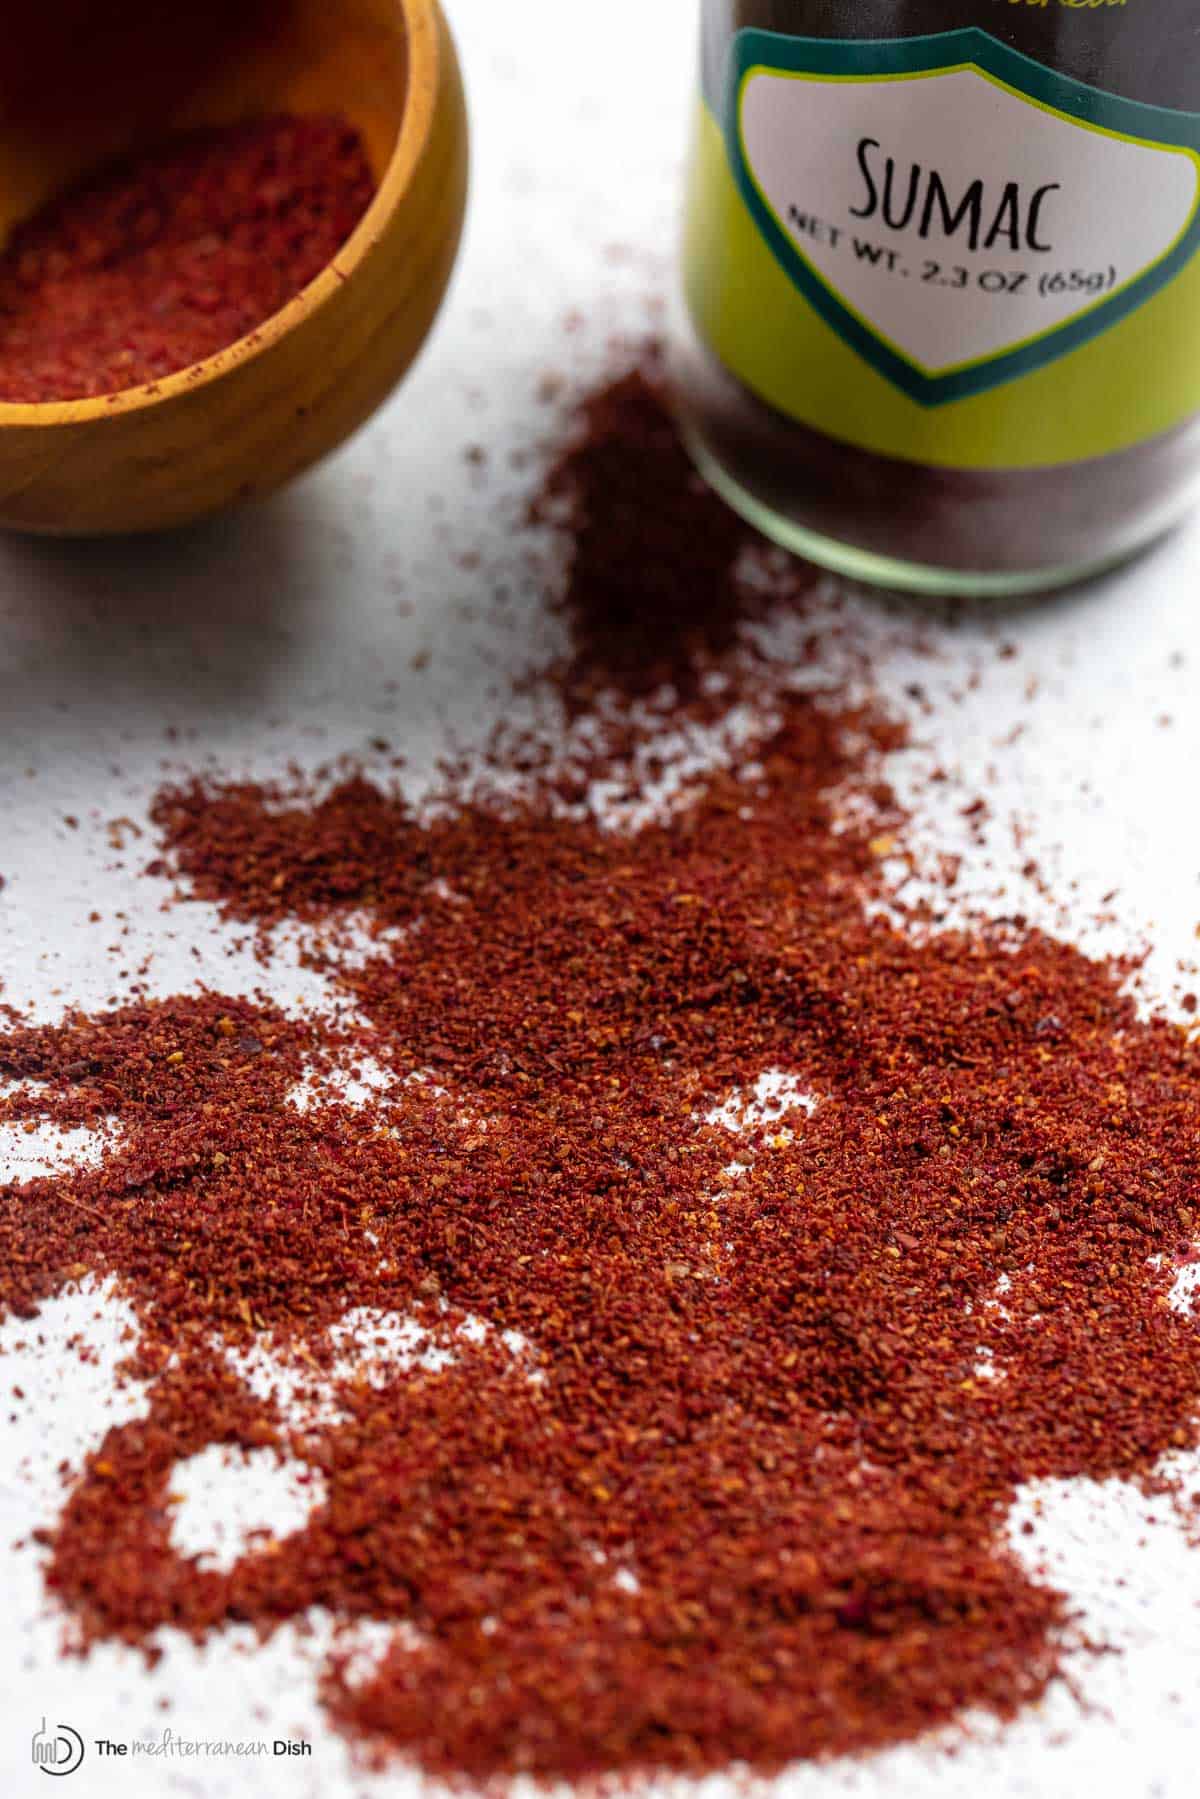 sumac spice sprinkled onto a flat surface with The Mediterranean Dish sumac and a container in the background.